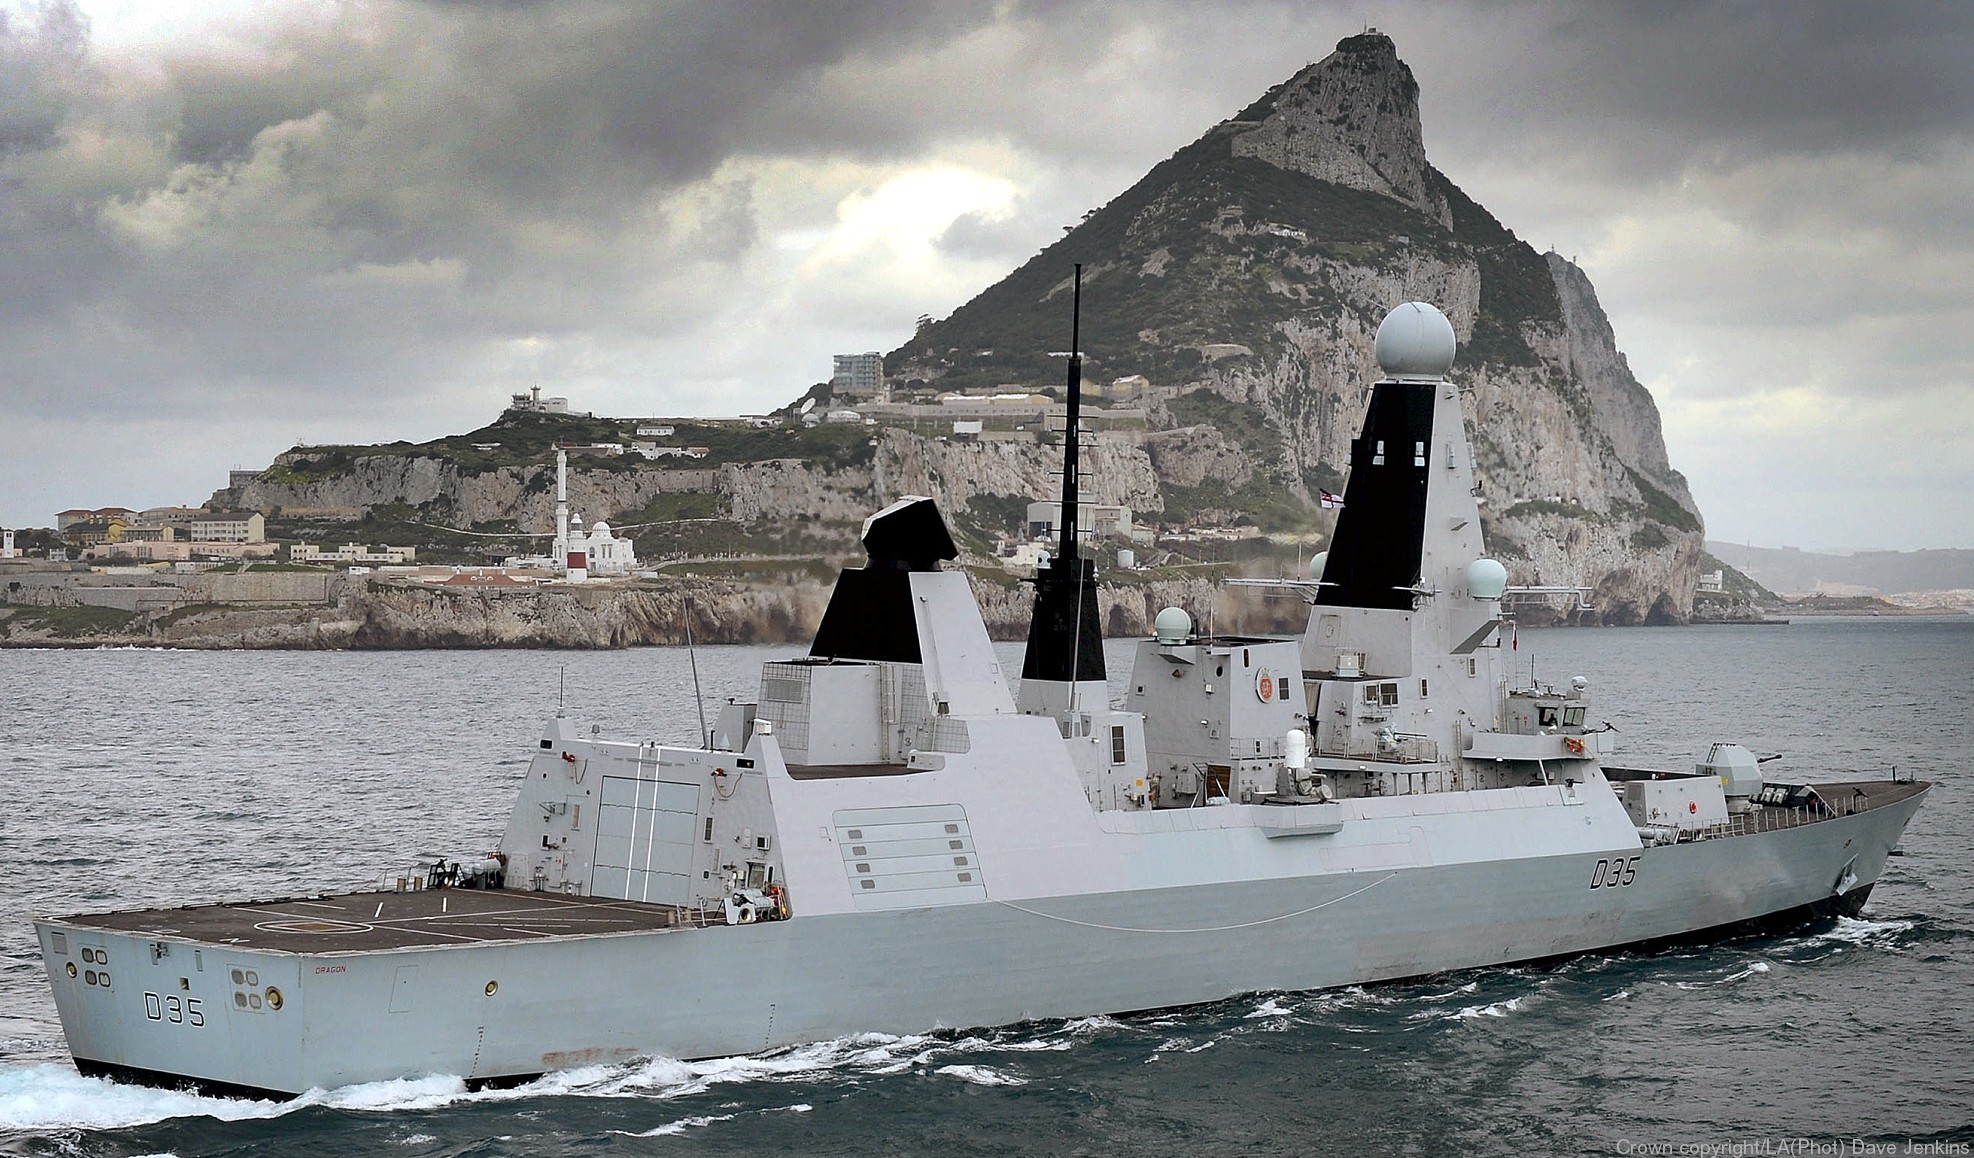 hms dragon d-35 type 45 daring class guided missile destroyer ddg royal navy sea viper paams 07 gibraltar